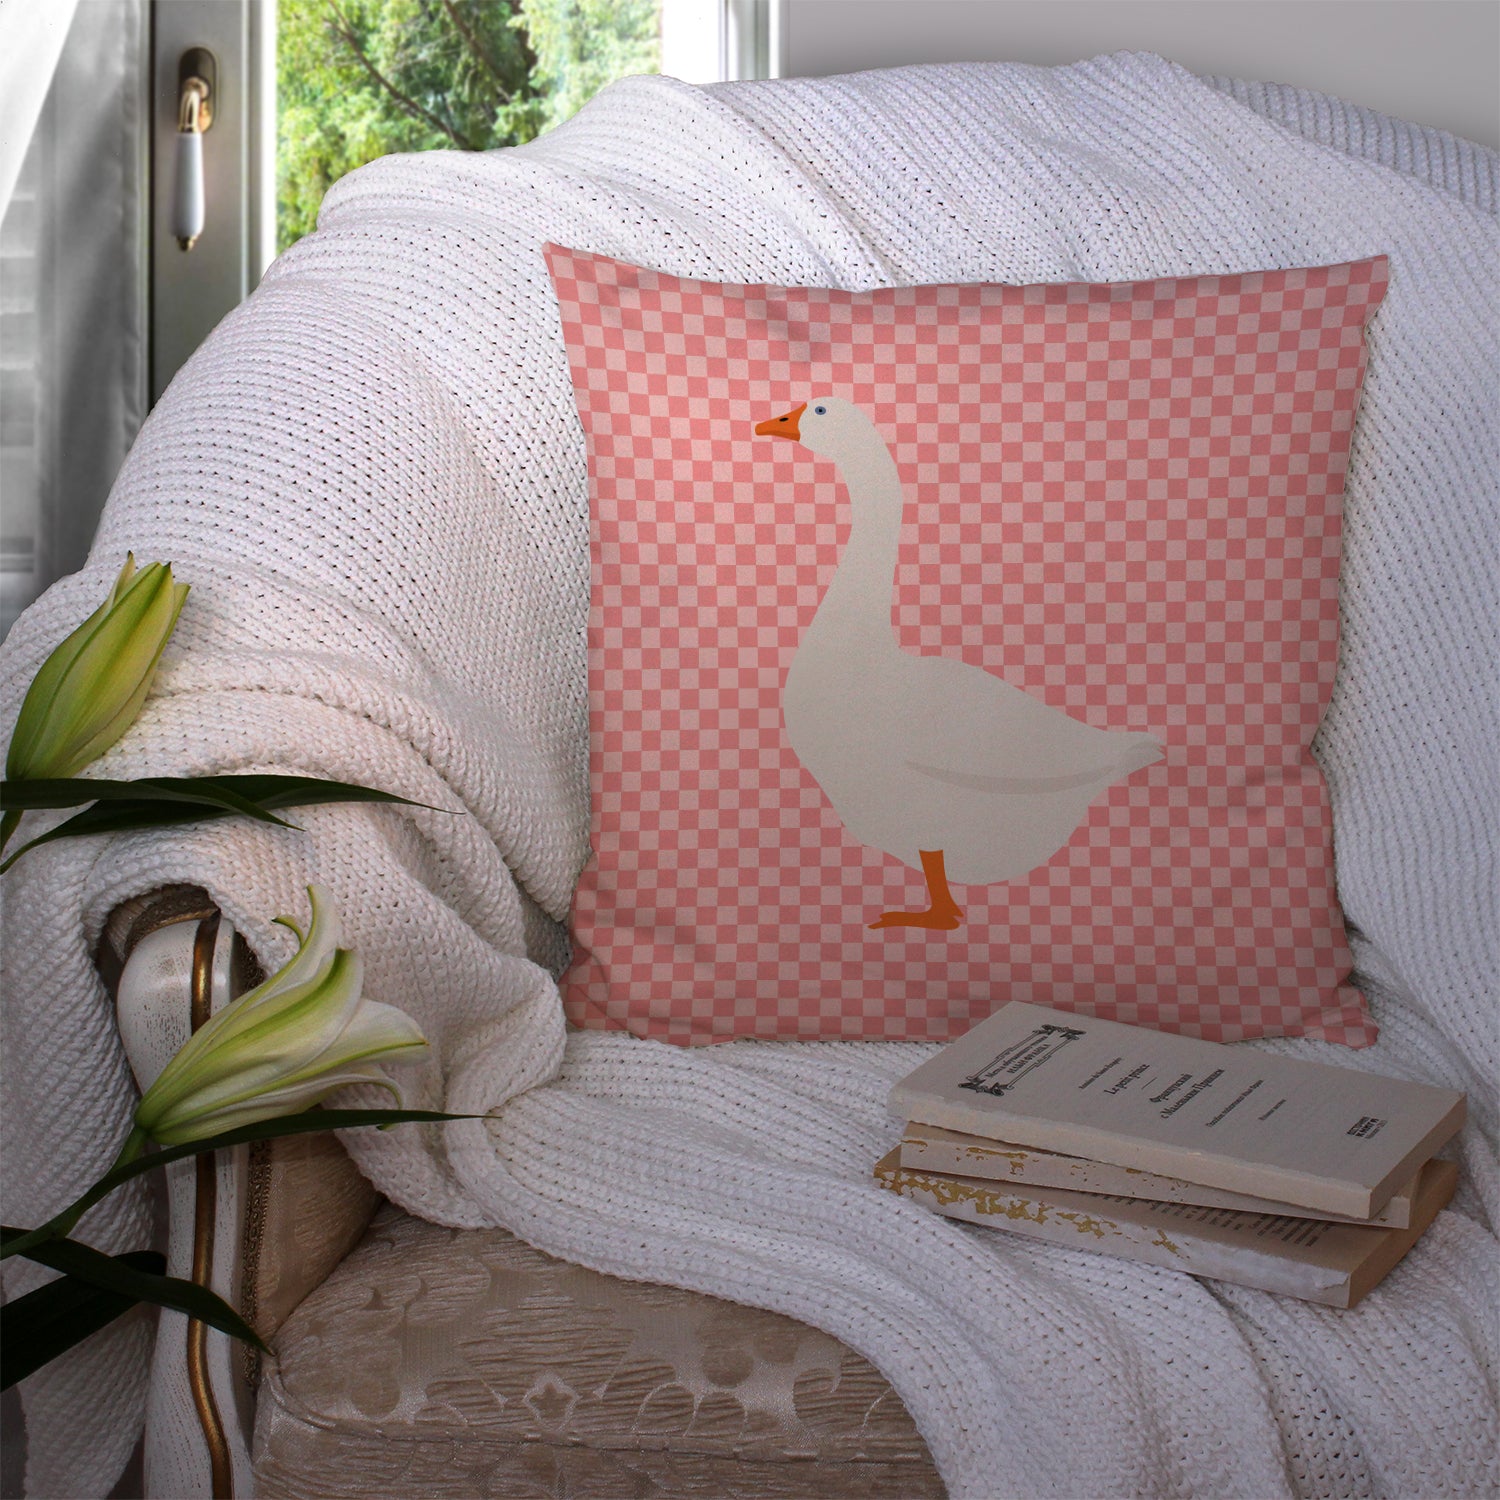 Embden Goose Pink Check Fabric Decorative Pillow BB7892PW1414 - the-store.com